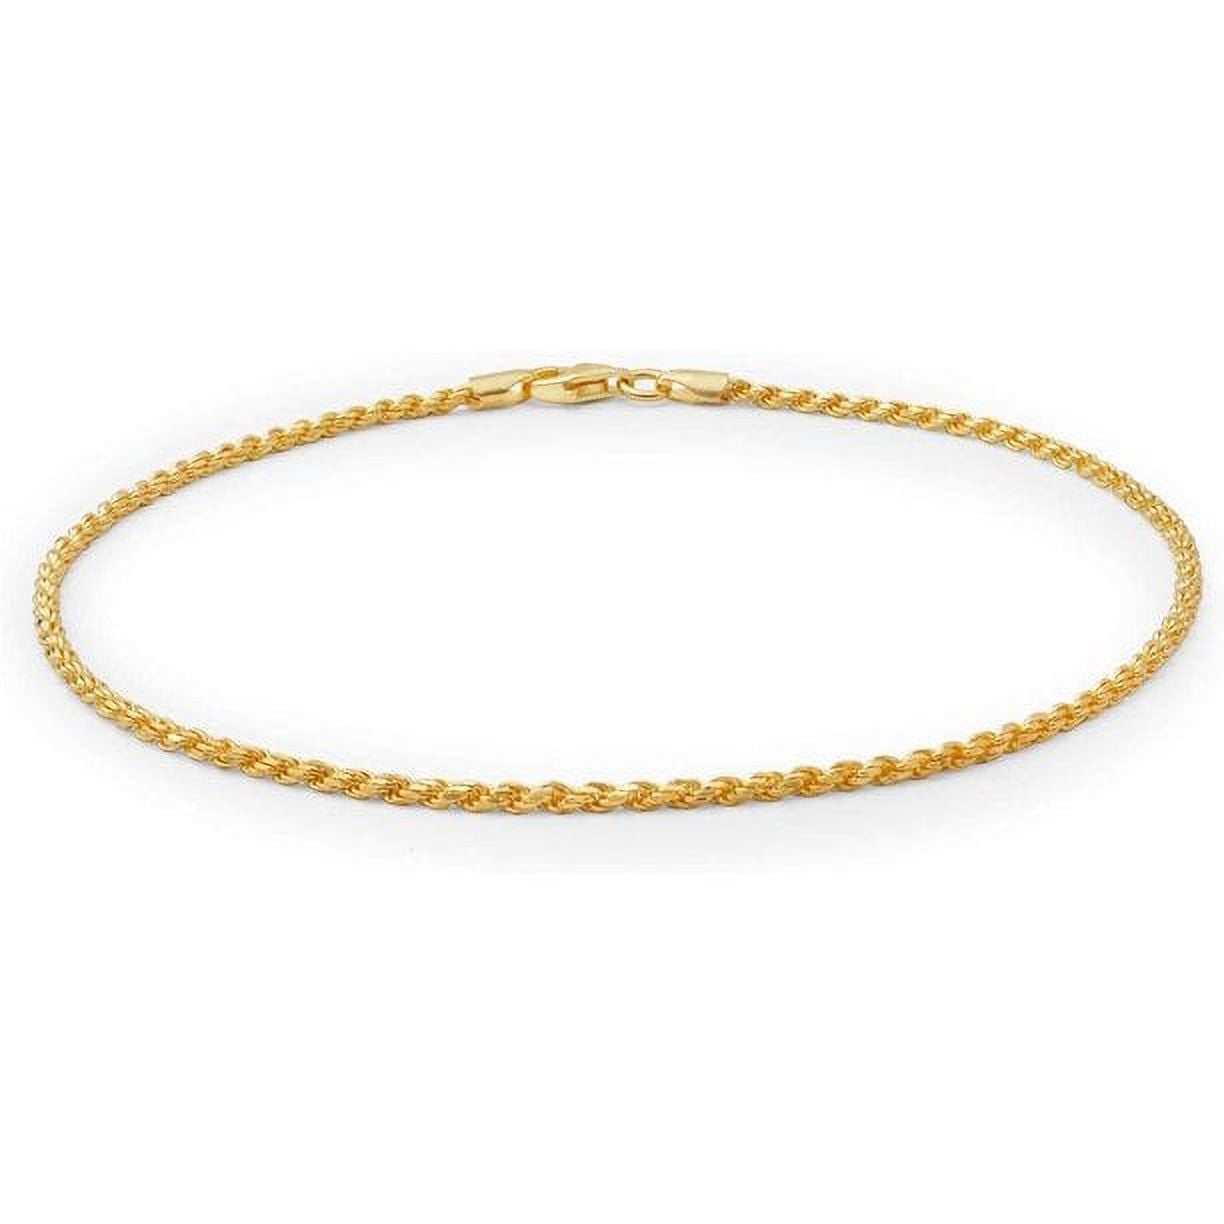 Classic 24K Gold Plated Heart Link Chain Bracelets Bangles For Women Girls  Jewelry Gifts - Walmart.com